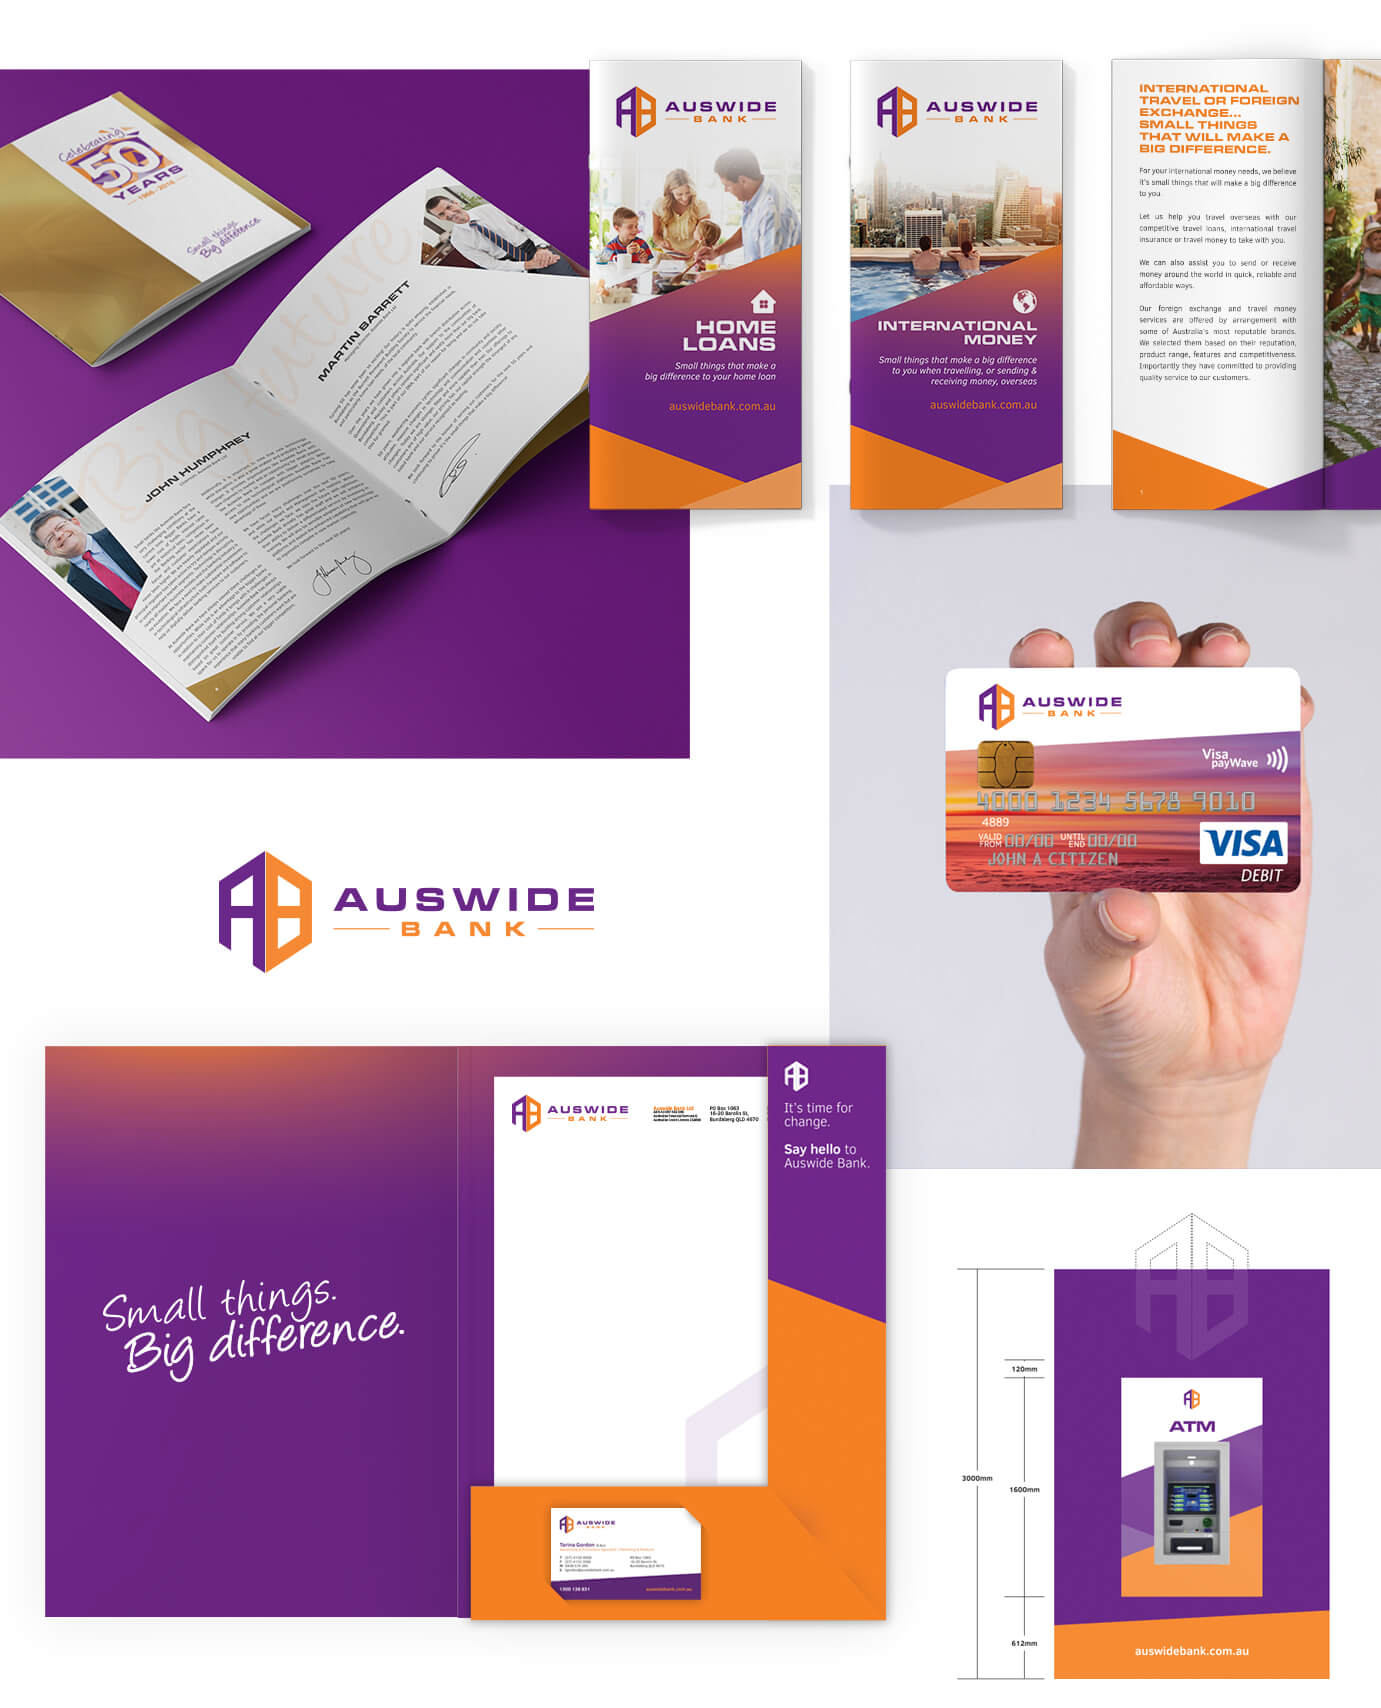 Auswide Bank collage mobile